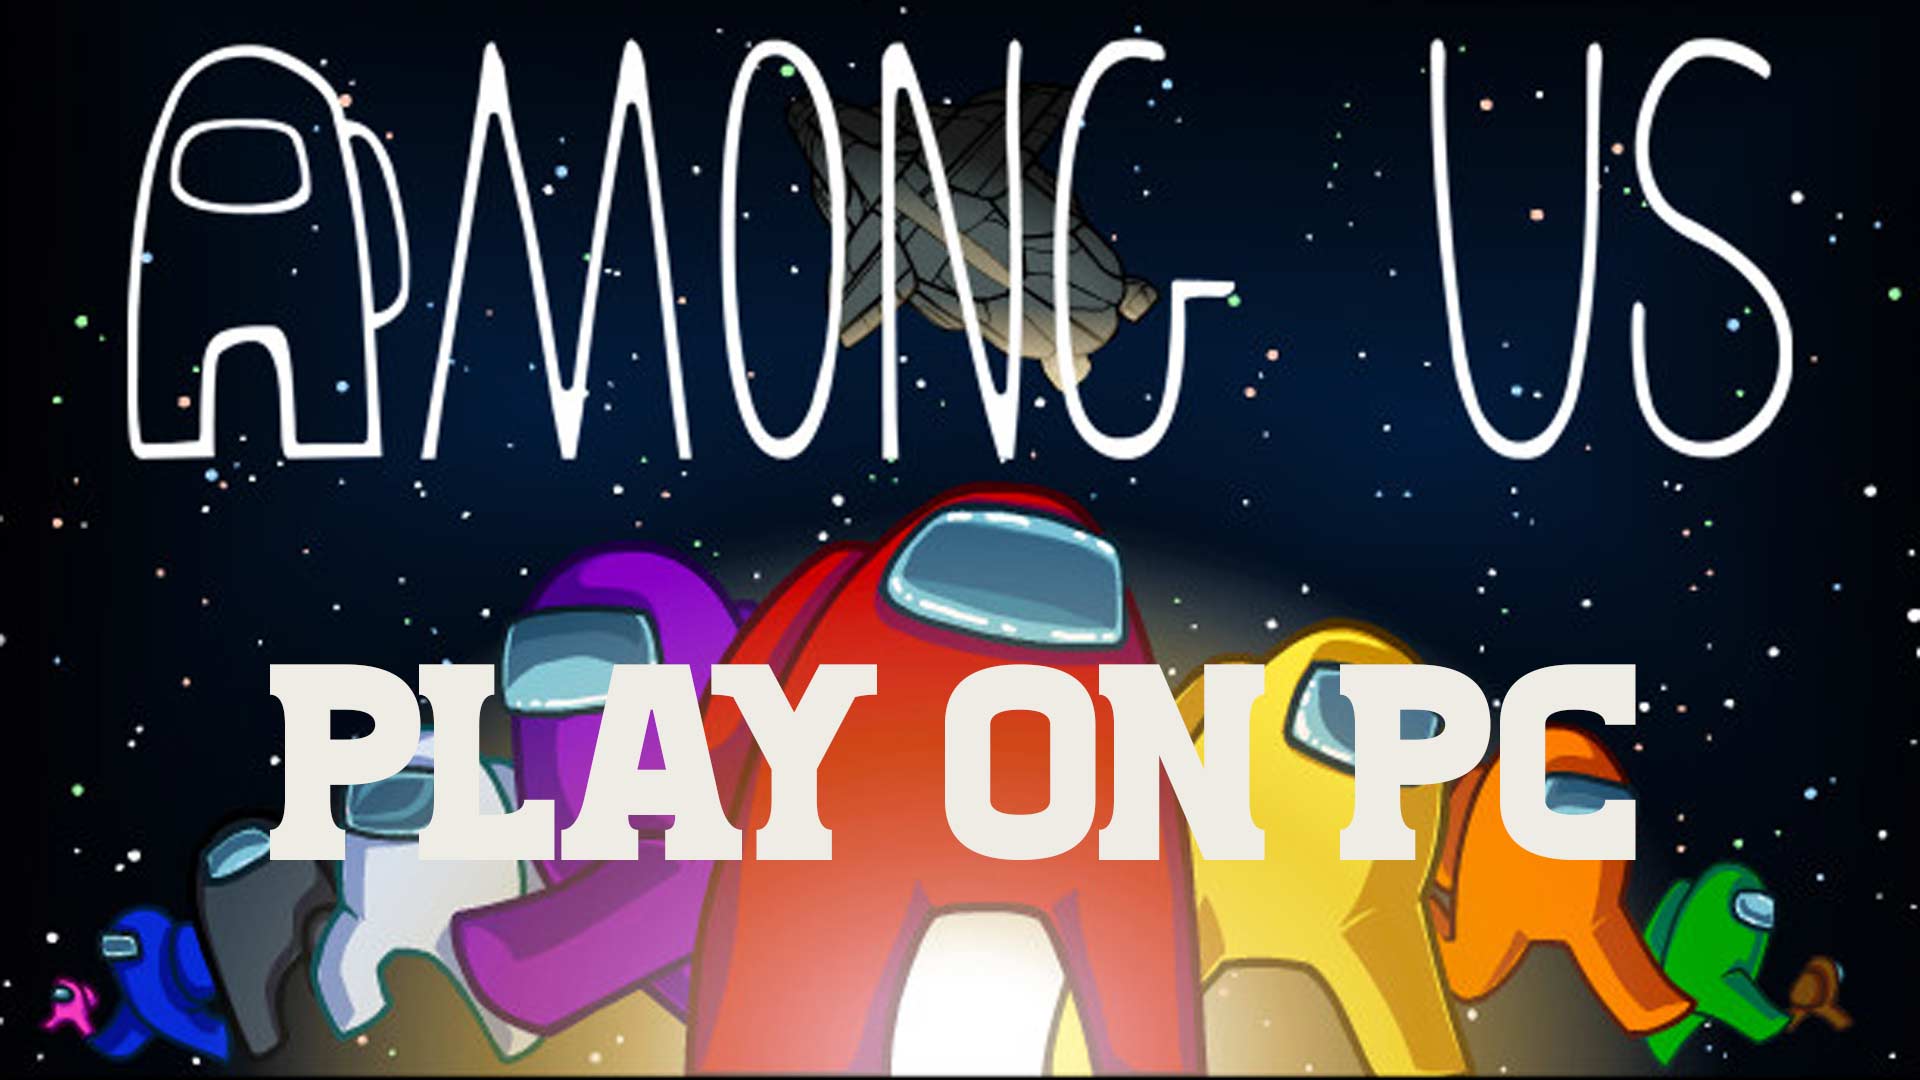 Among Us: how to download and play for free on mobile, PC, Mac